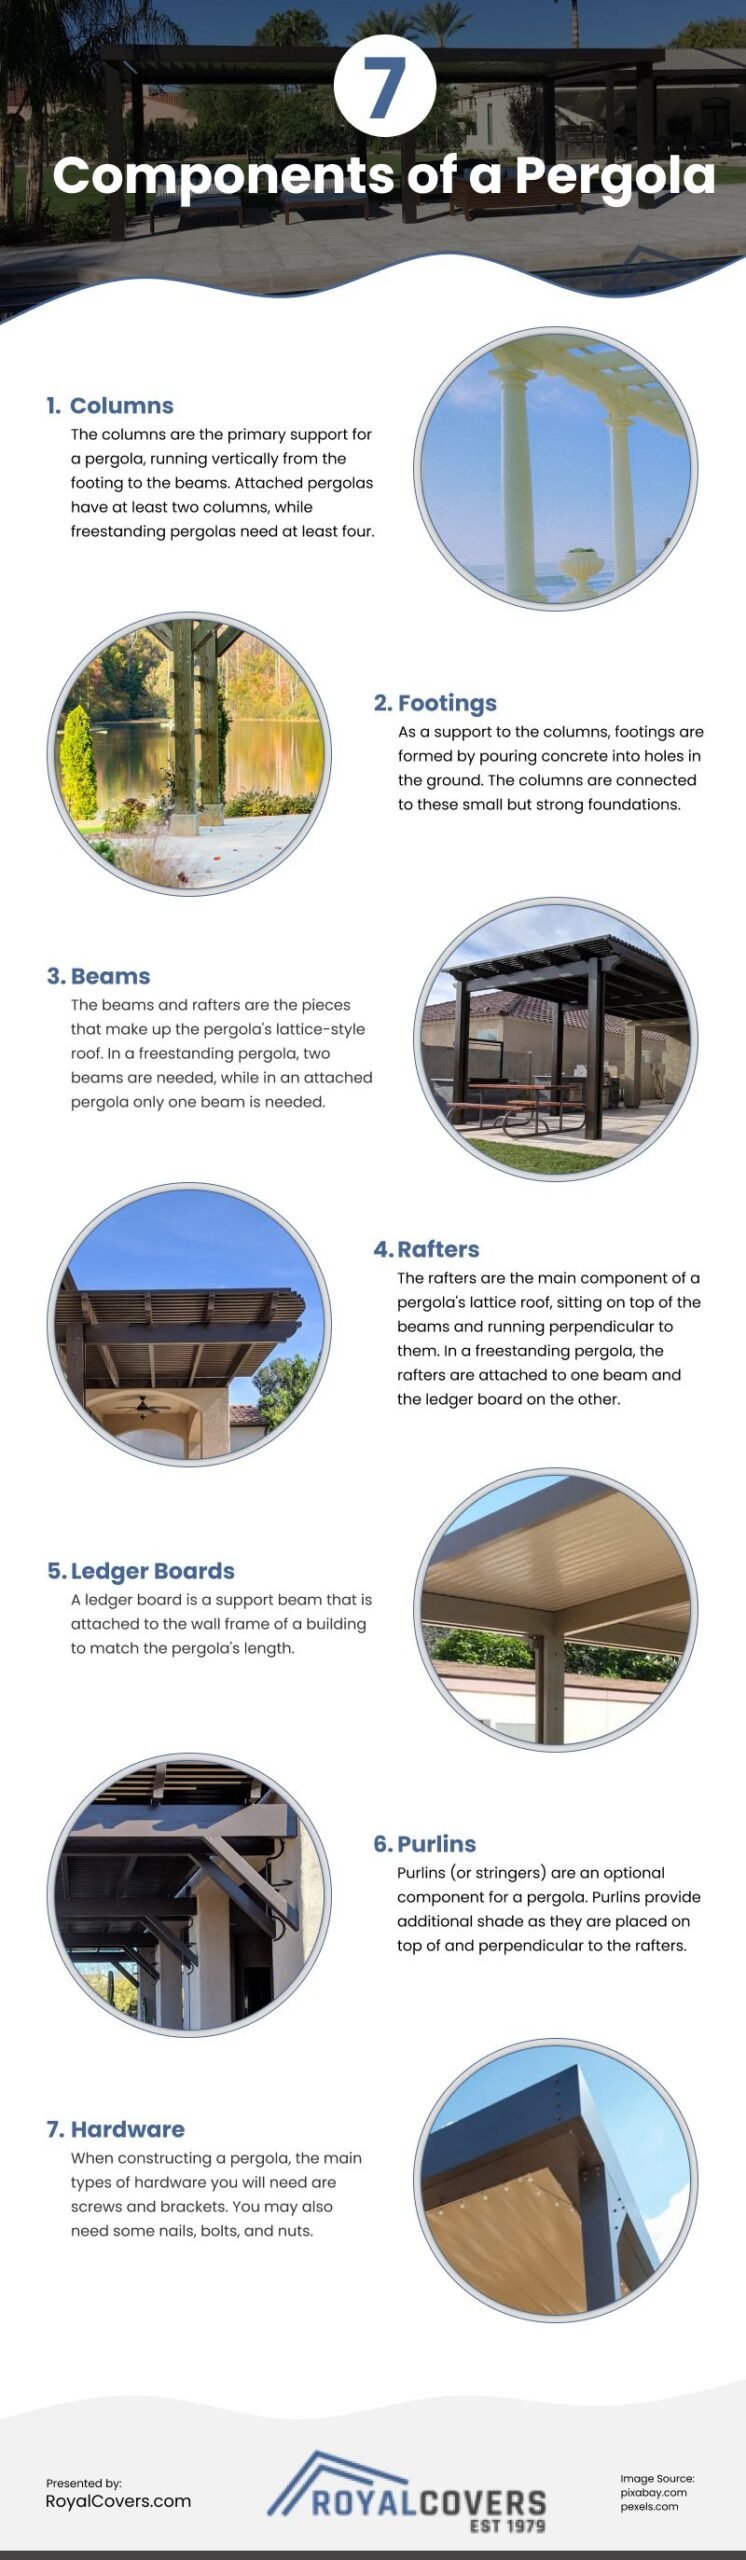 7 Components of a Pergola Infographic